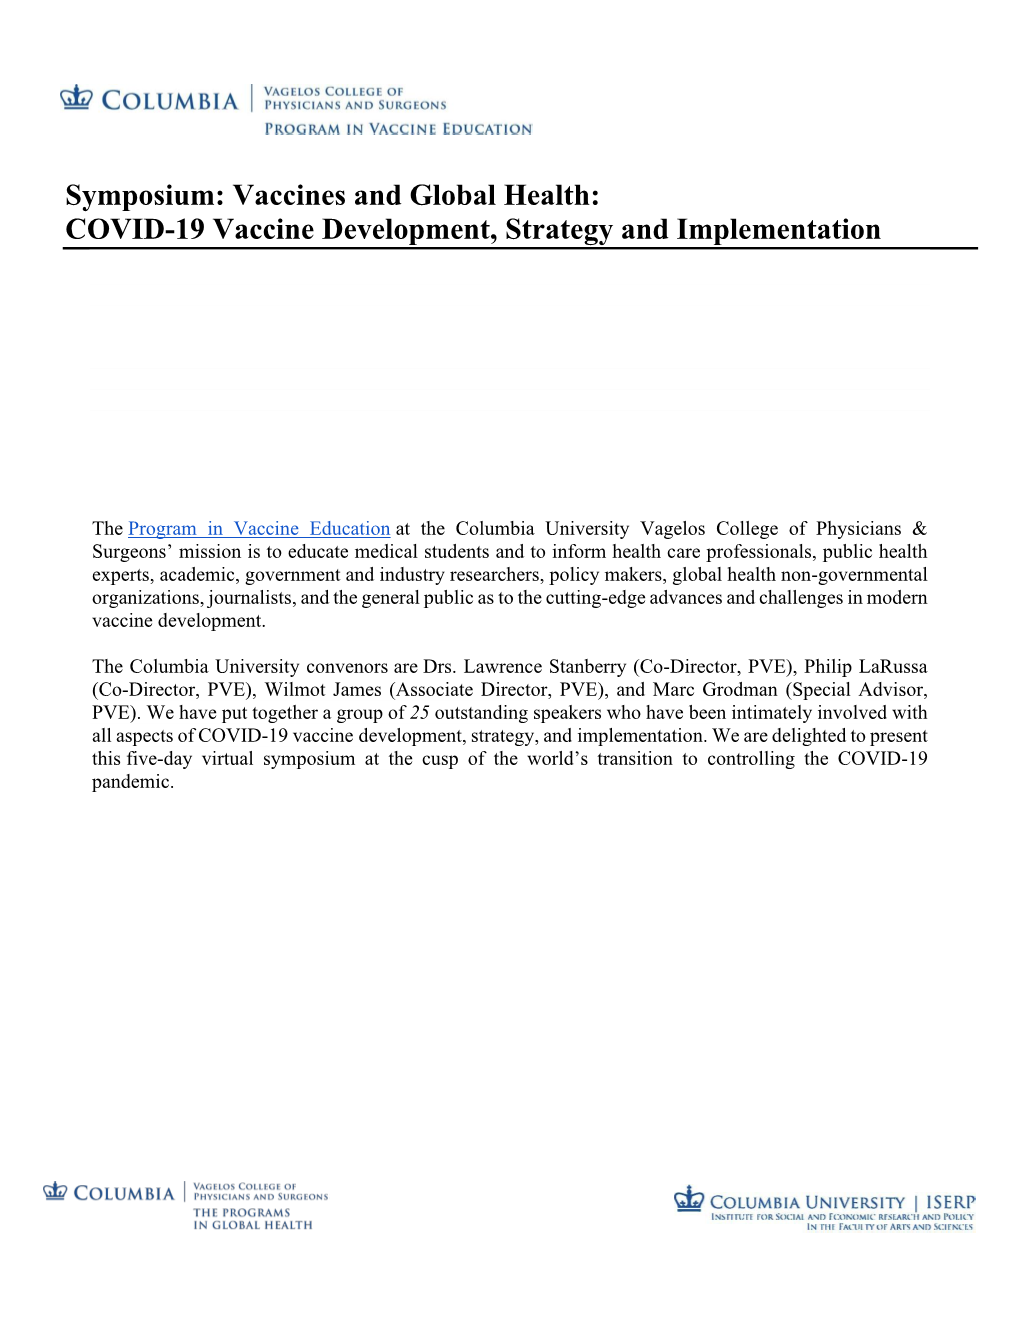 Vaccines and Global Health: COVID-19 Vaccine Development, Strategy and Implementation